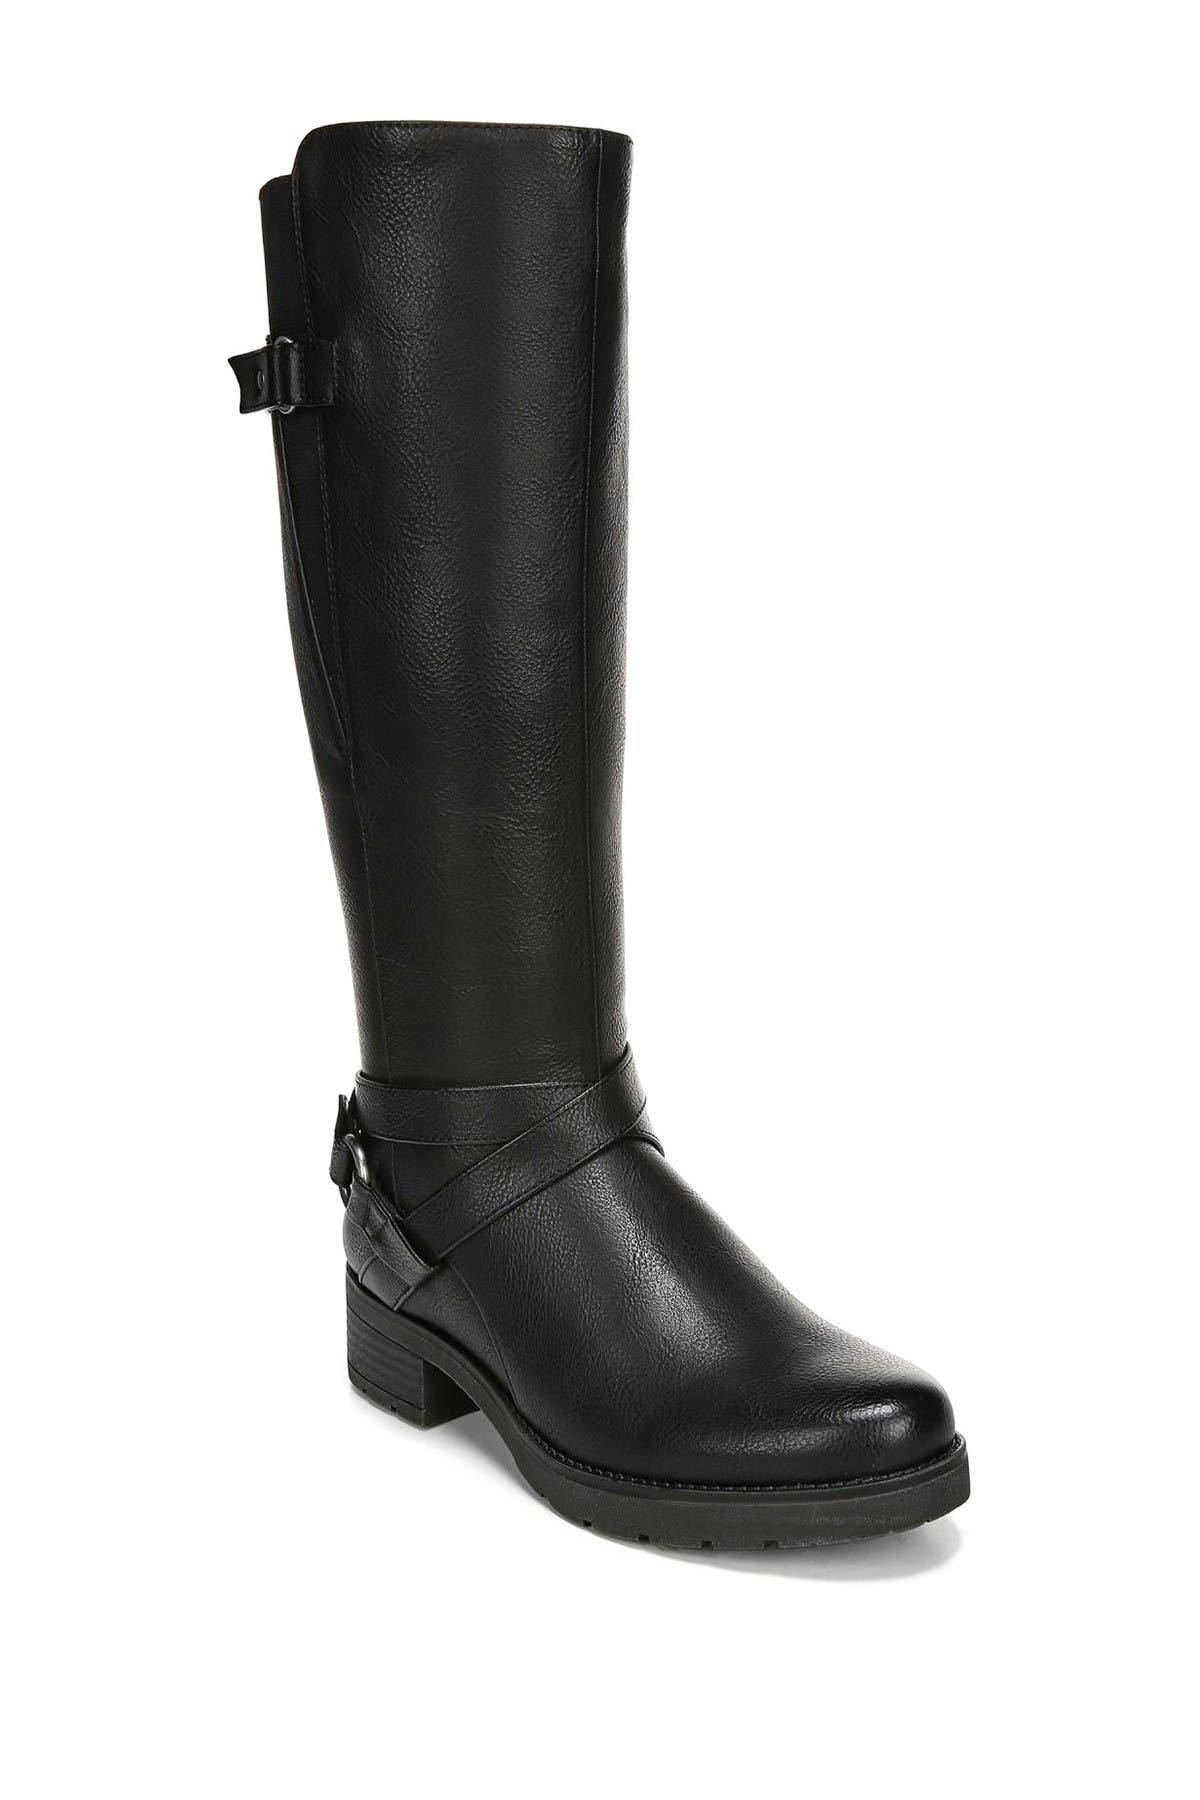 wide calf and wide width boots